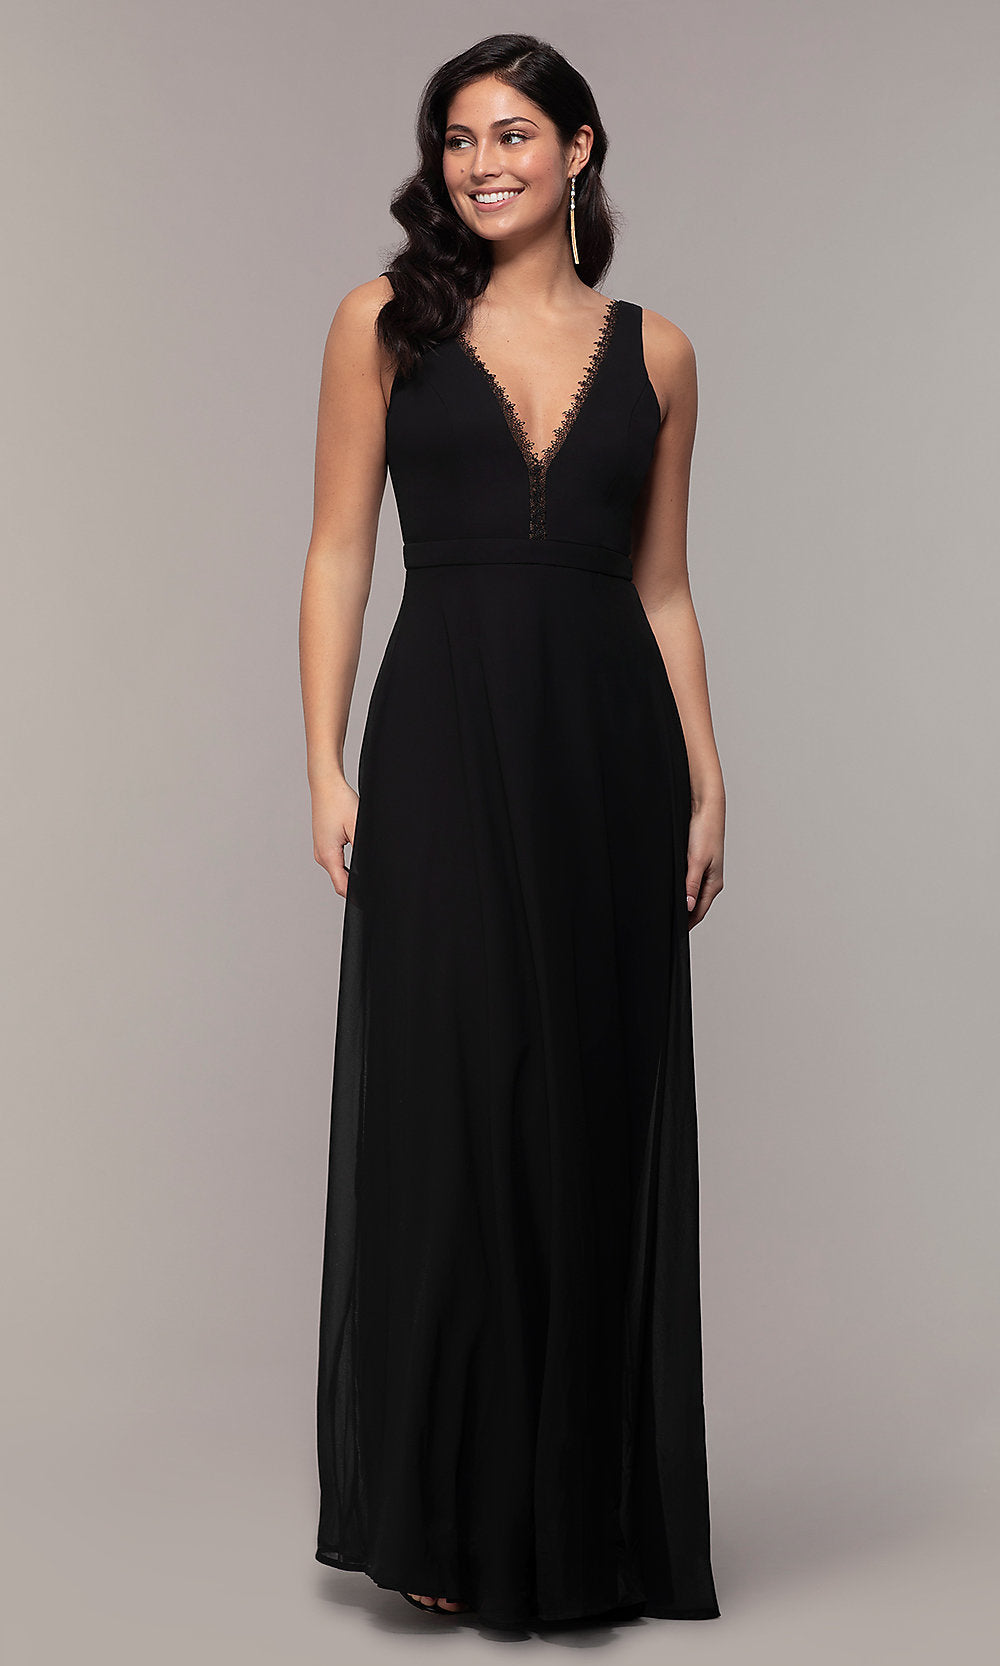  Long Black Formal V-Neck Evening Gown with Lace Trim